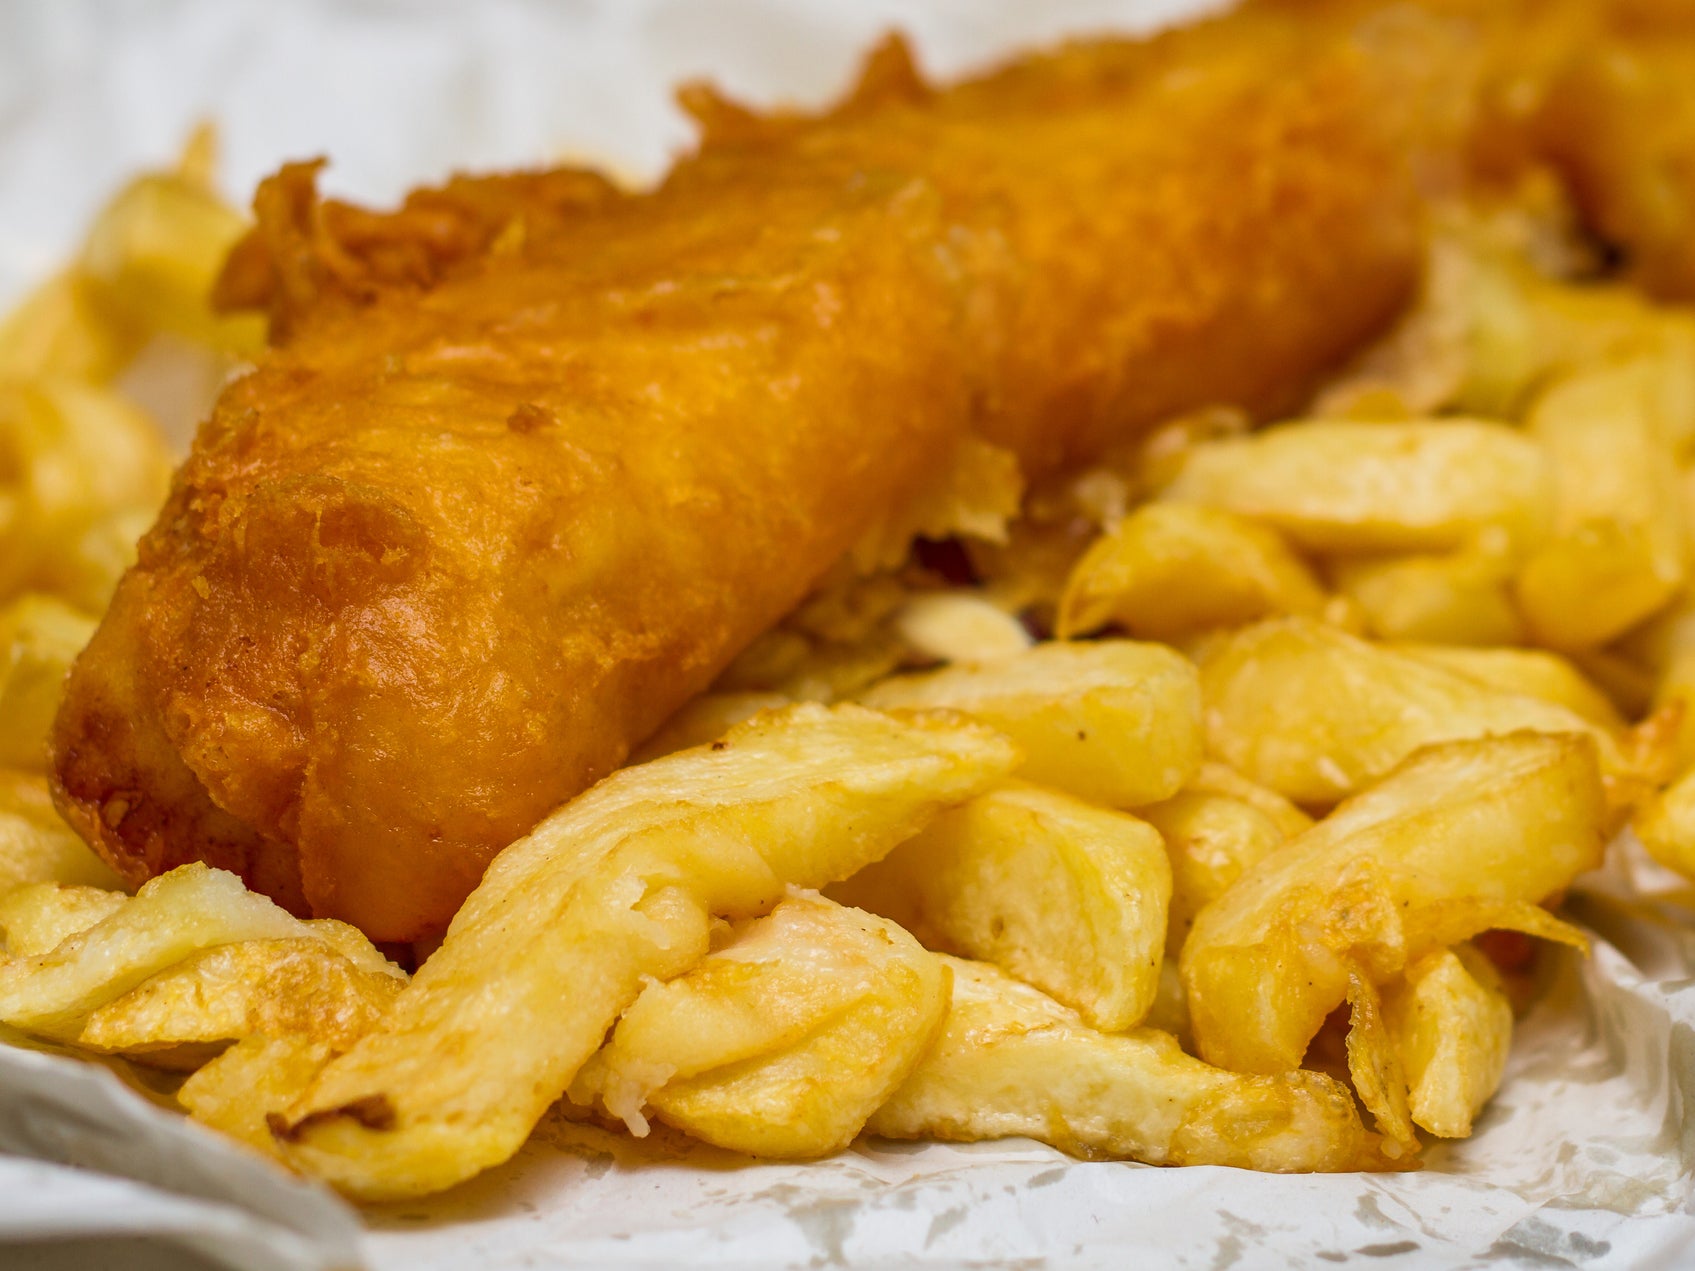 Four in 10 are now more likely to report hygiene breaches at a local takeaway